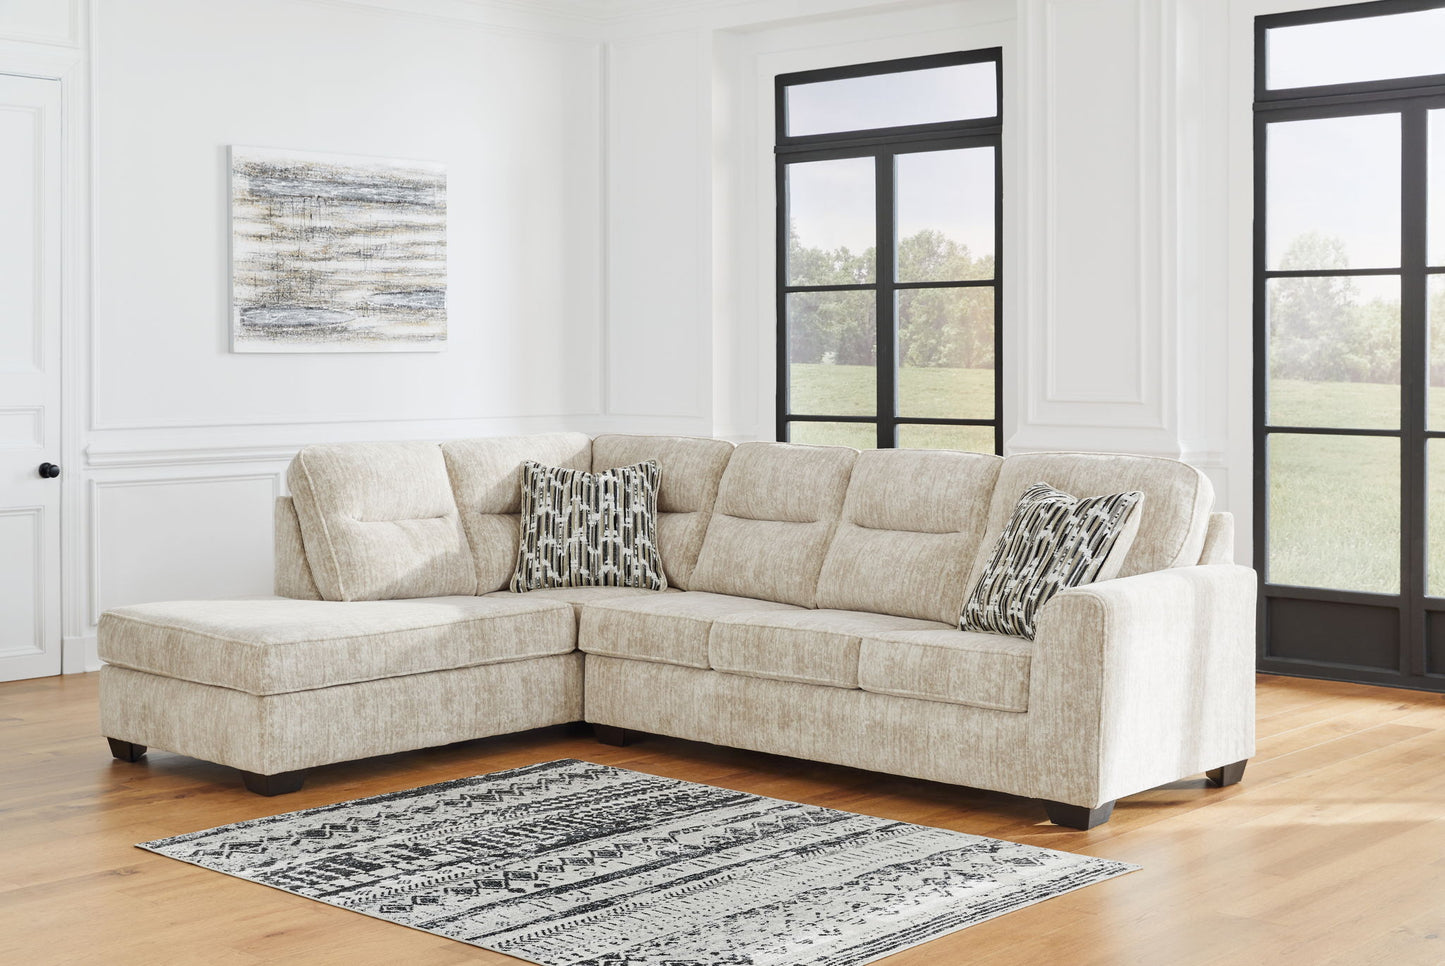 Lonoke - Parchment - 3 Pc. - 2-Piece Sectional With Laf Corner Chaise, Ottoman